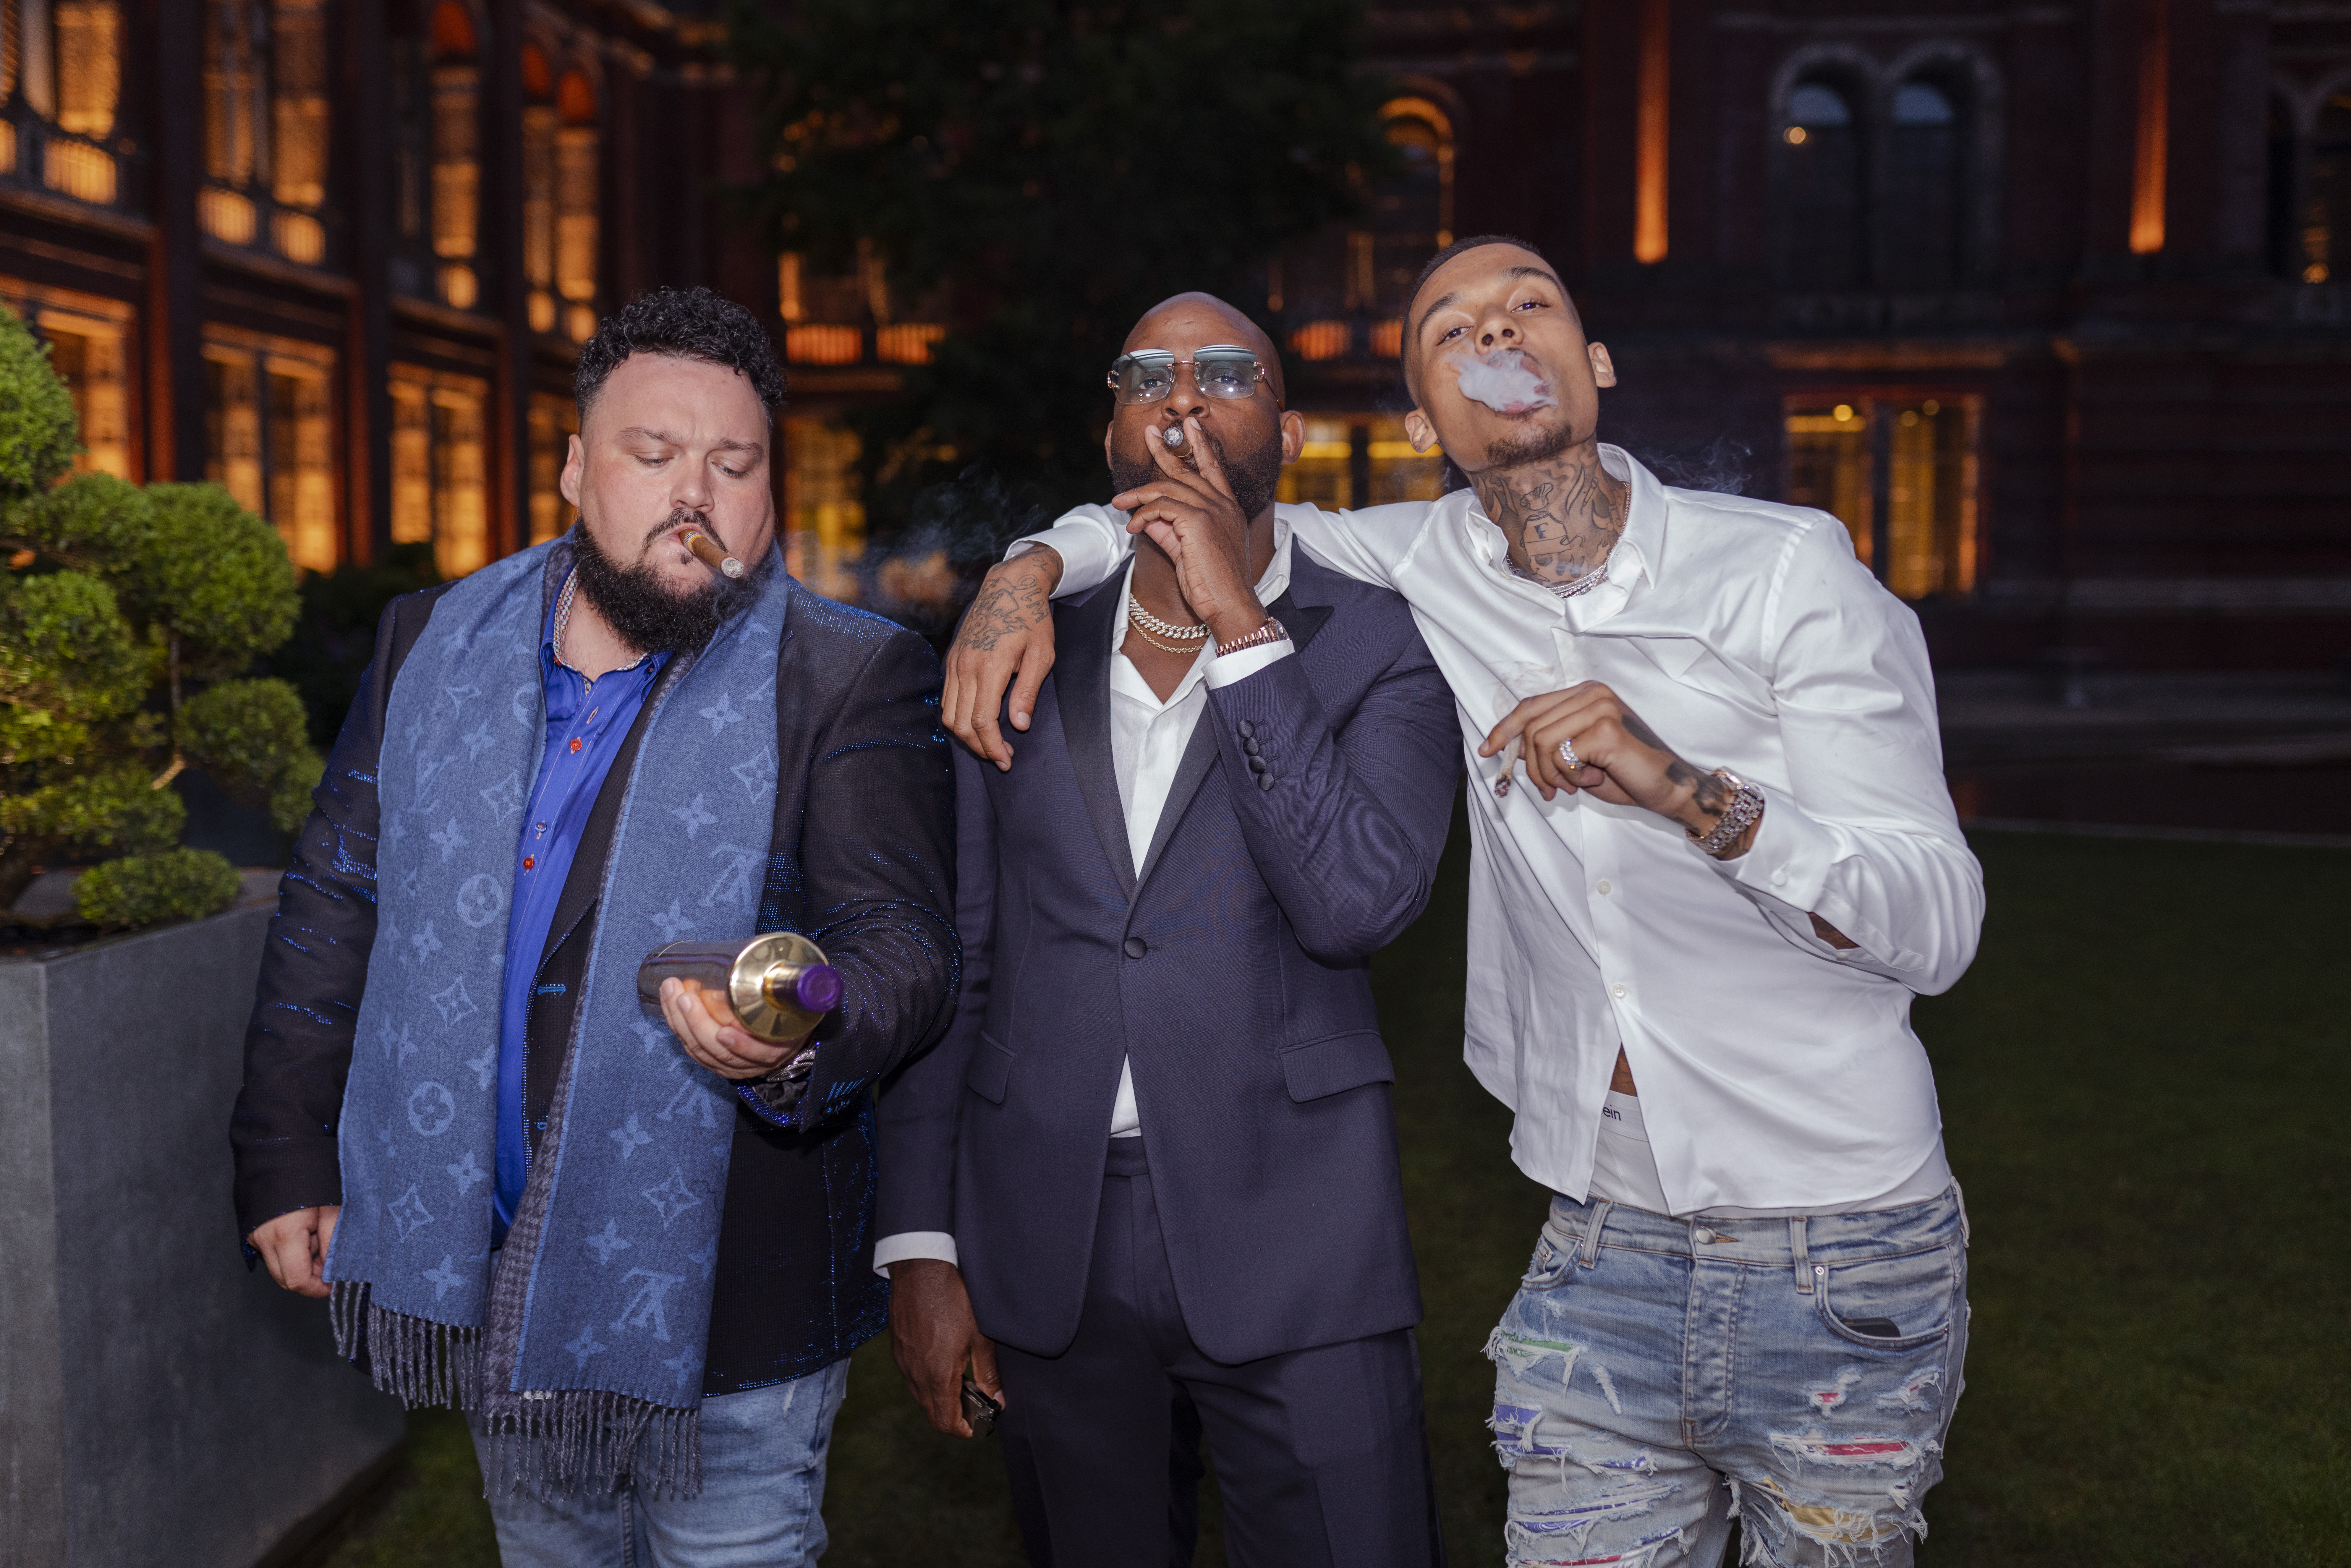 Charlie Sloth & Post & Fredo at GRM Gala presented by GRM Daily & Beats by Dr. Dre on 9th August at the V&A_Photocredit Johnathan Williams